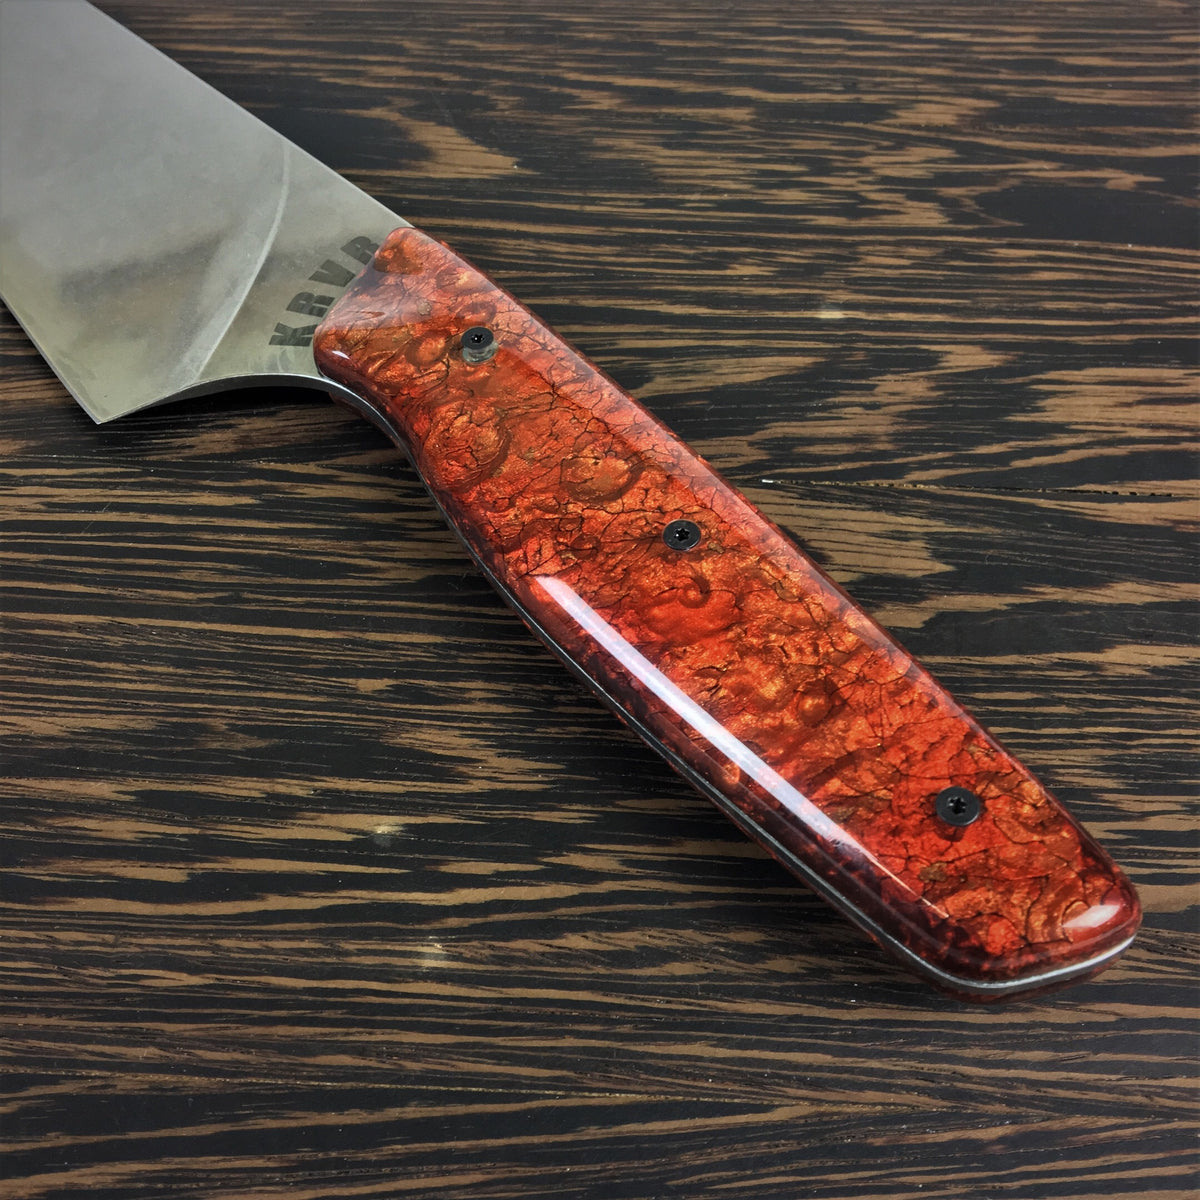 Mars Attacks! - 8” Gyuto Chef Knife S35VN Stainless Steel